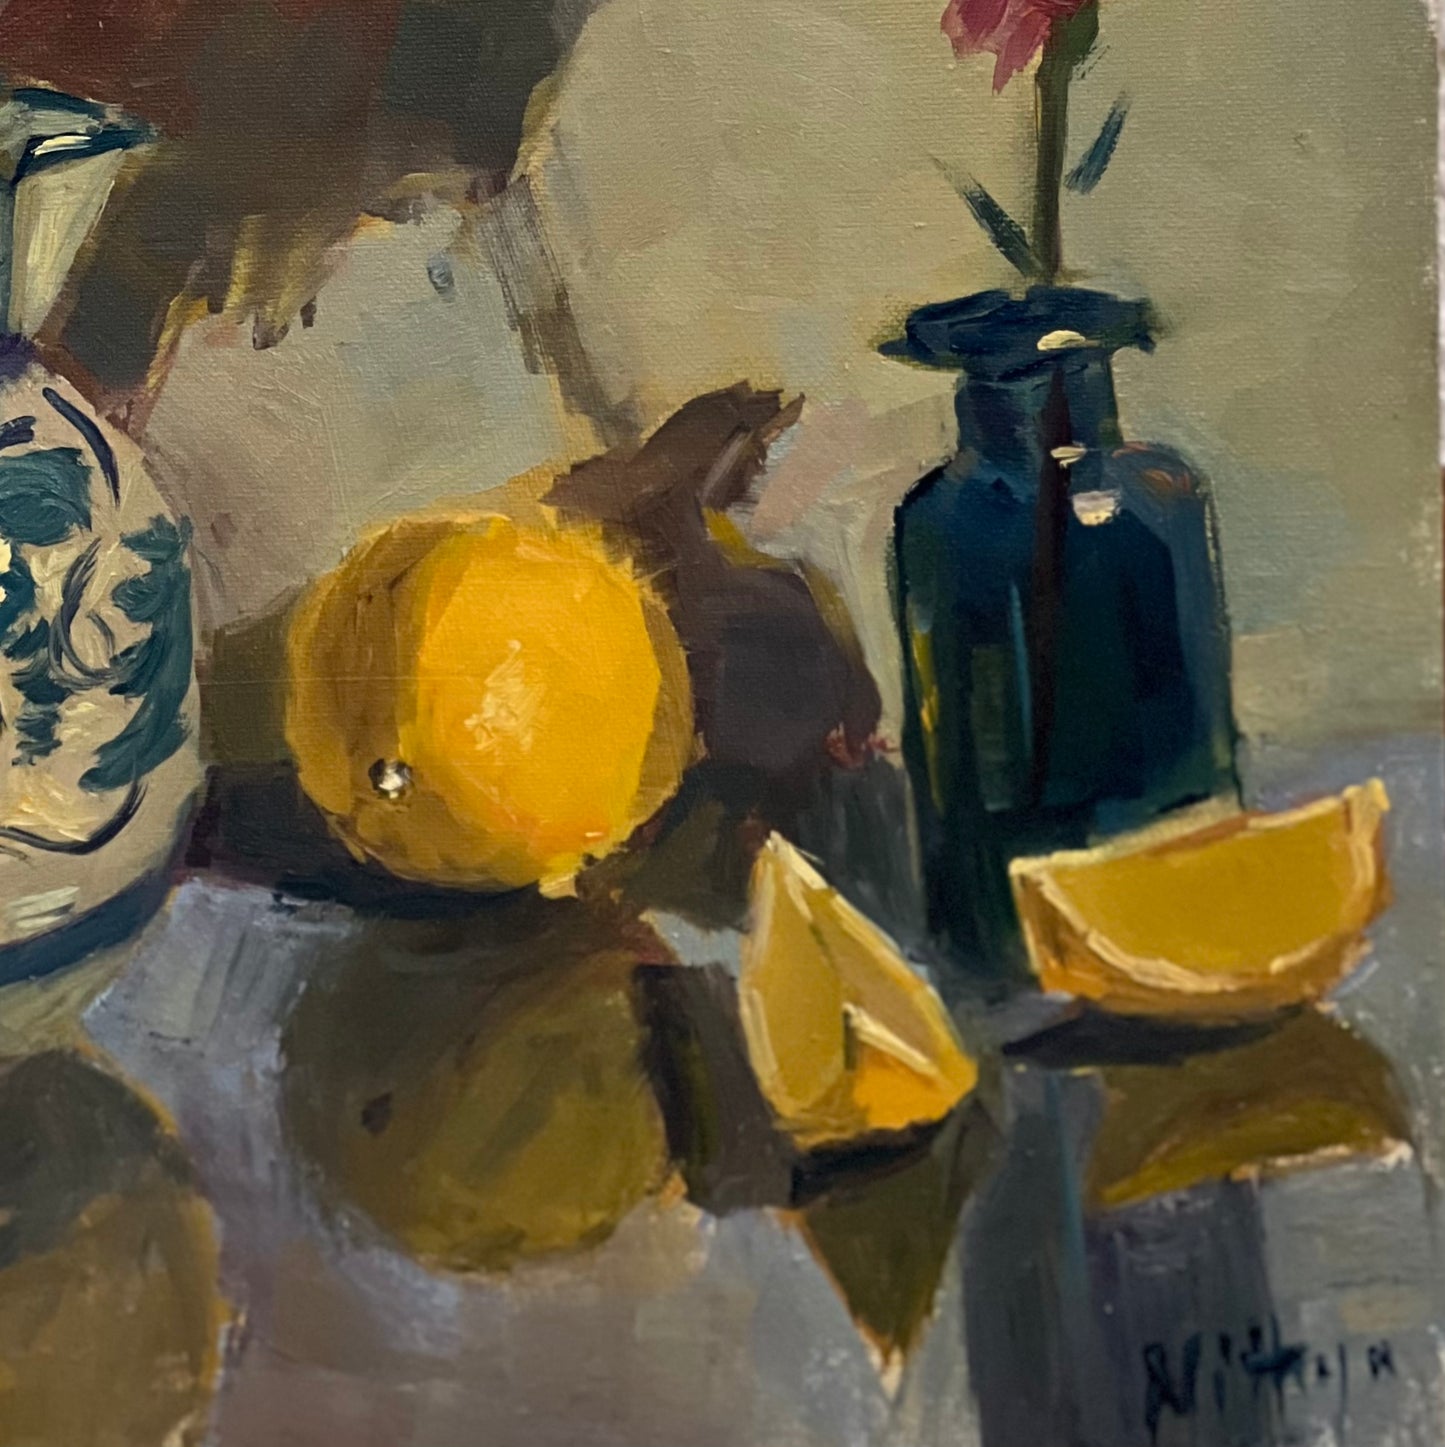 Lemons and Flowers at night - still life oil painting